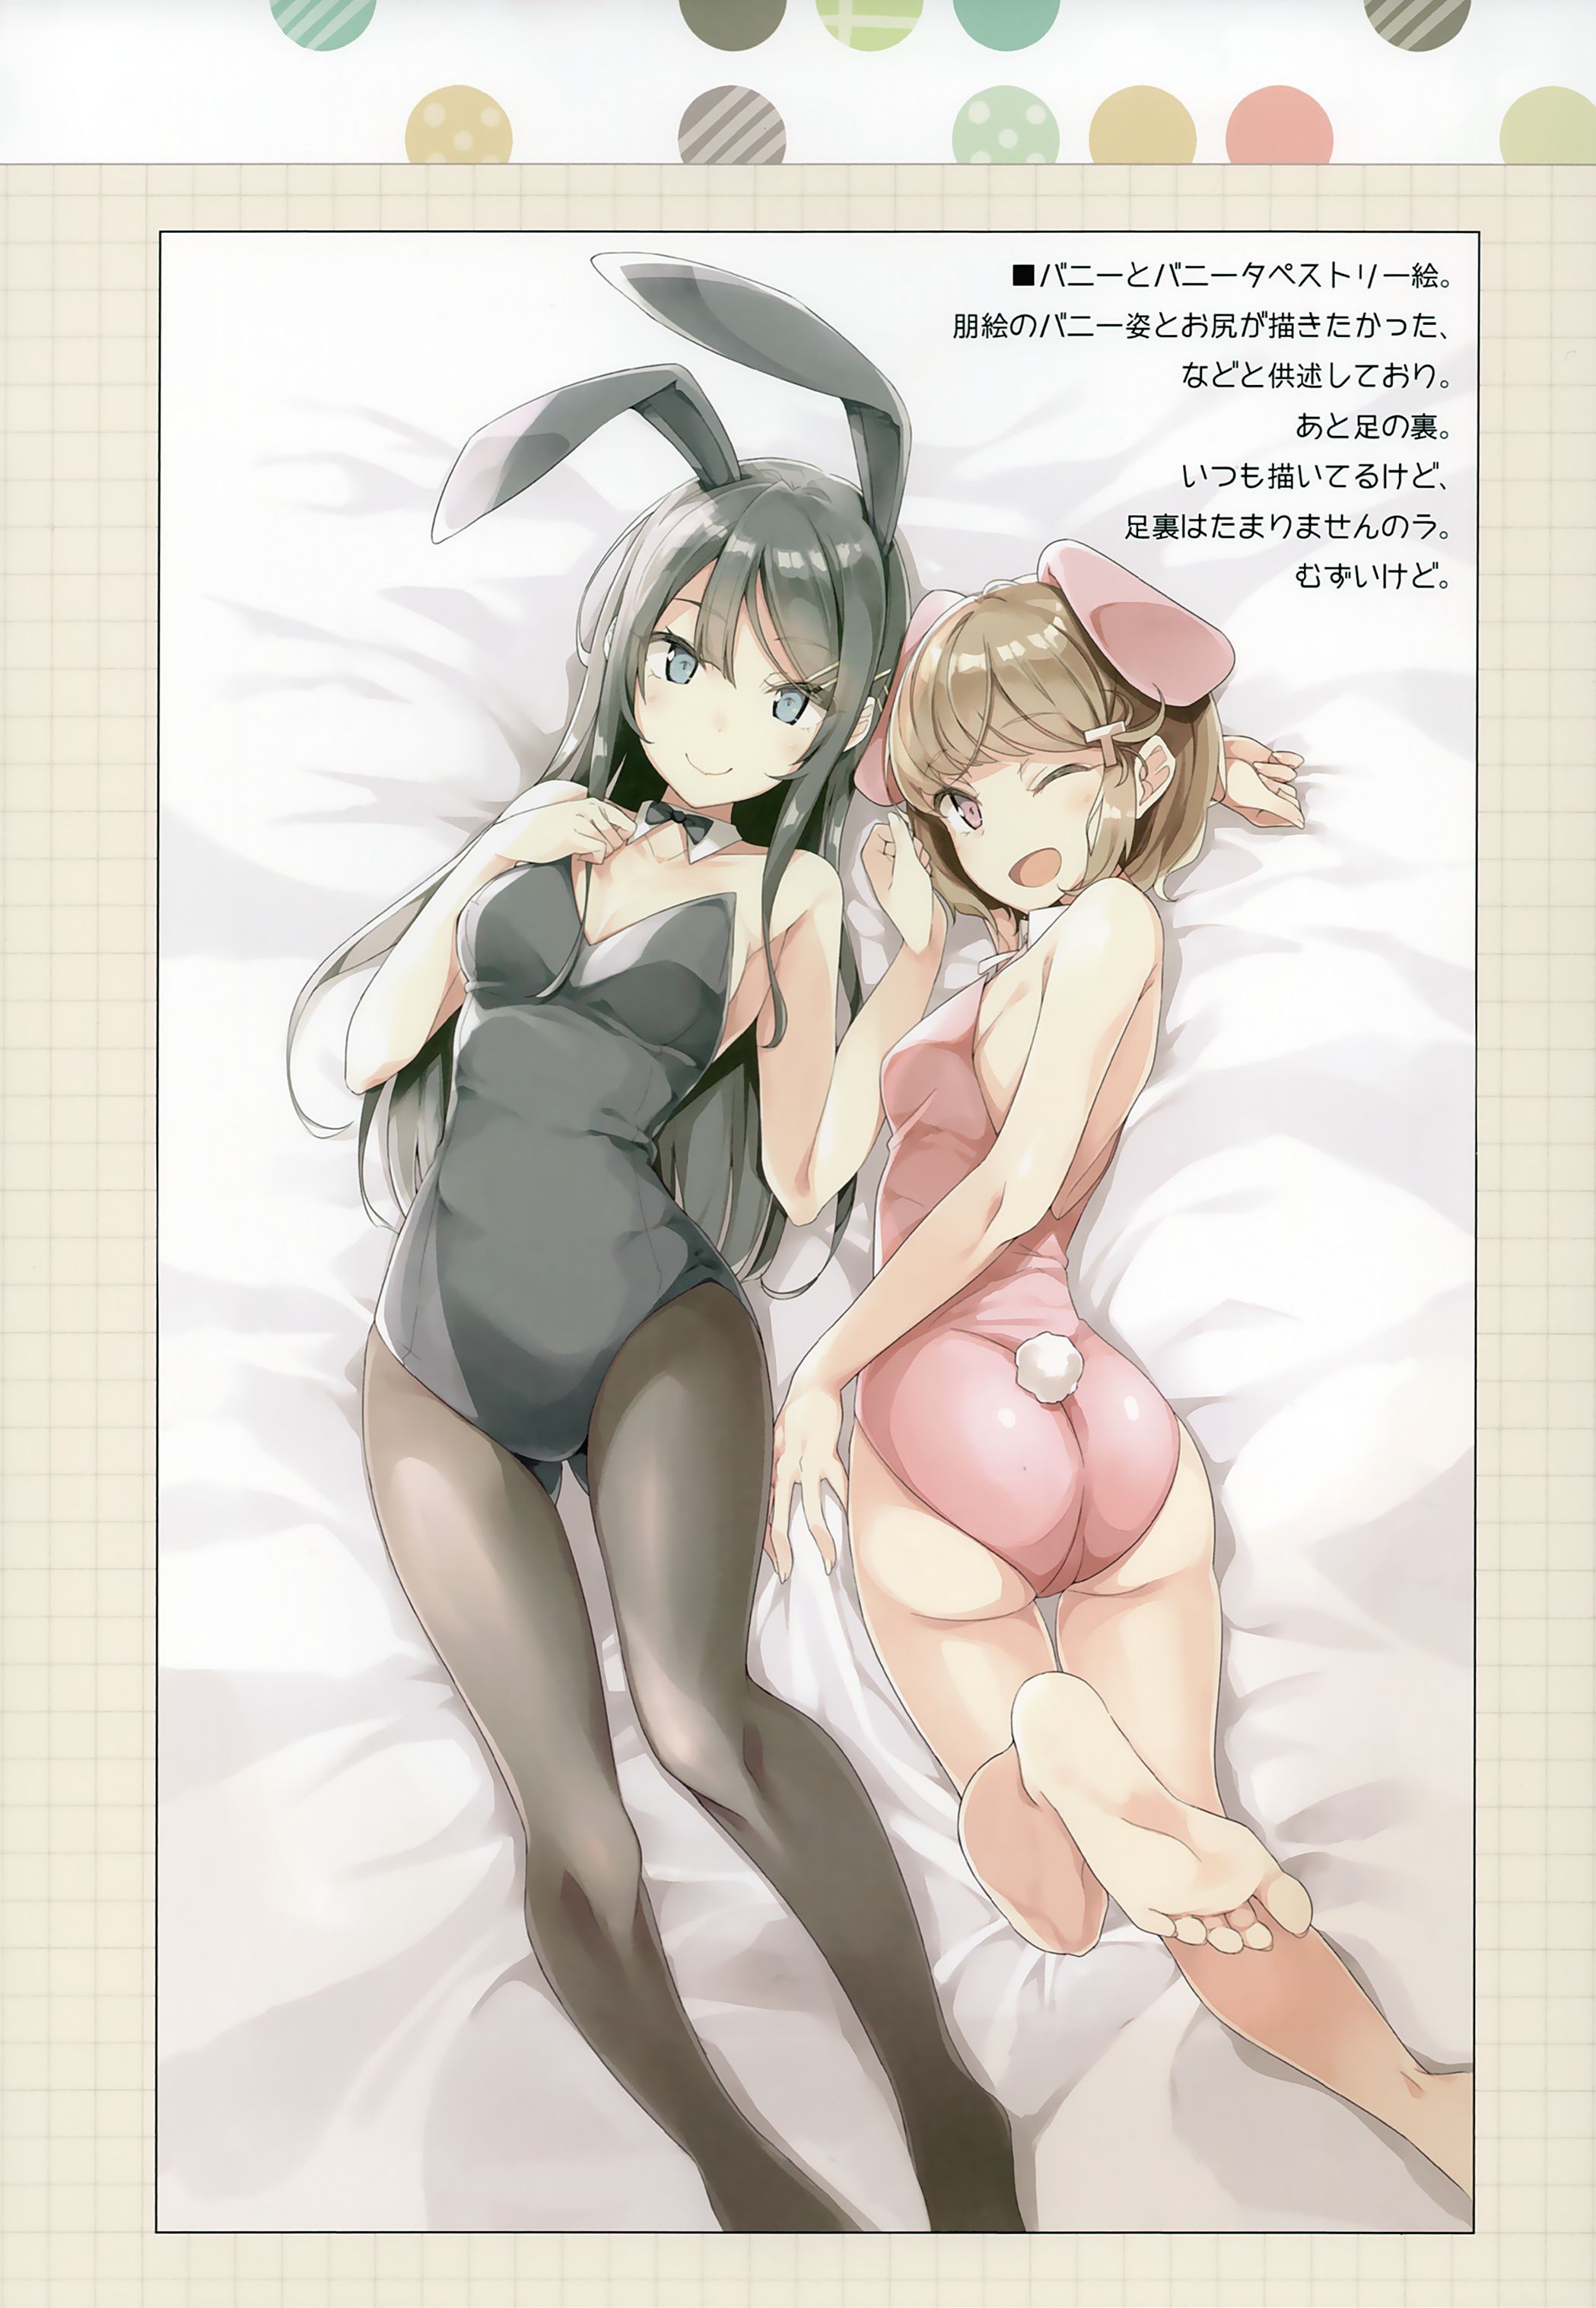 Secondary eroticism of girls' legs and pants seen through stockings is abnormal wwwww [50 sheets] 15